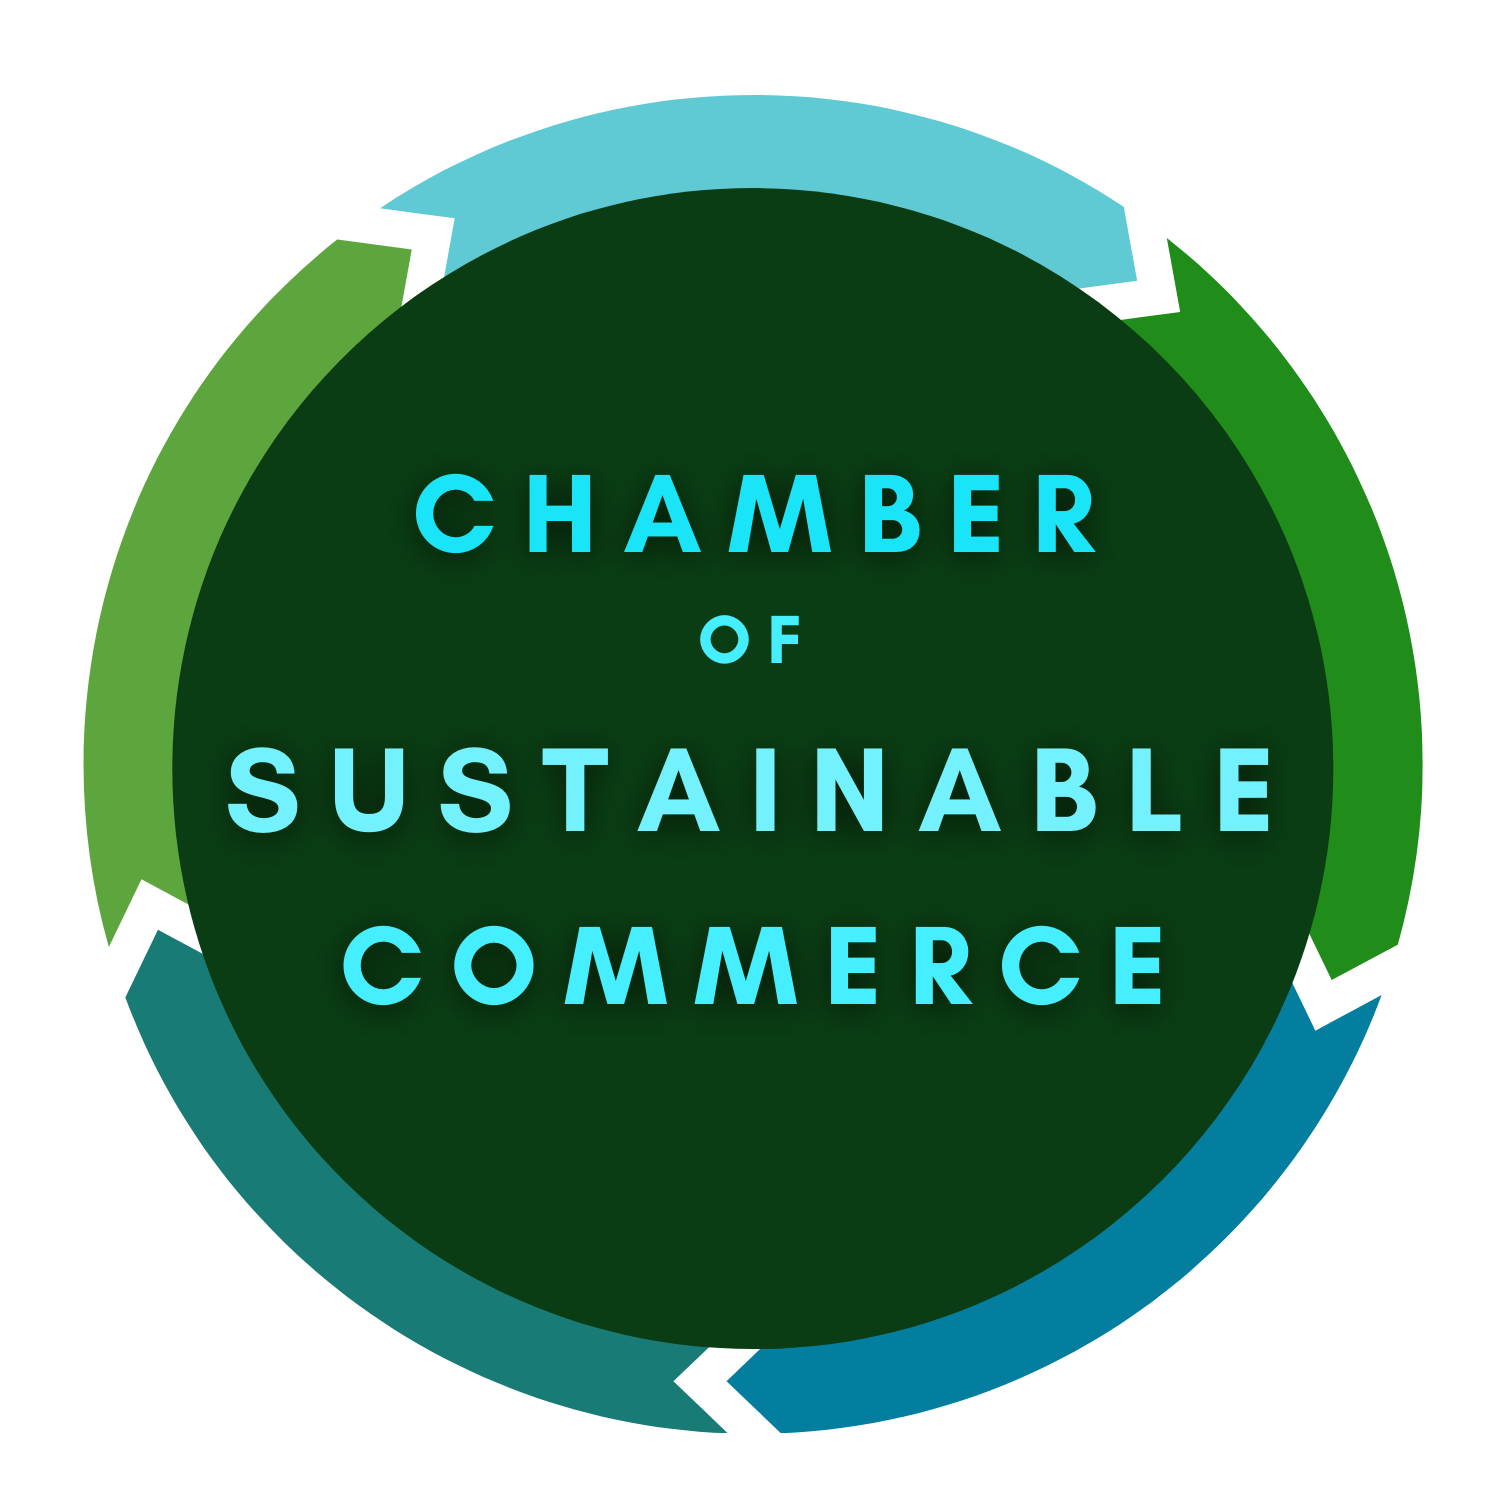 Chamber of Sustainable Commerce Logo (2).png